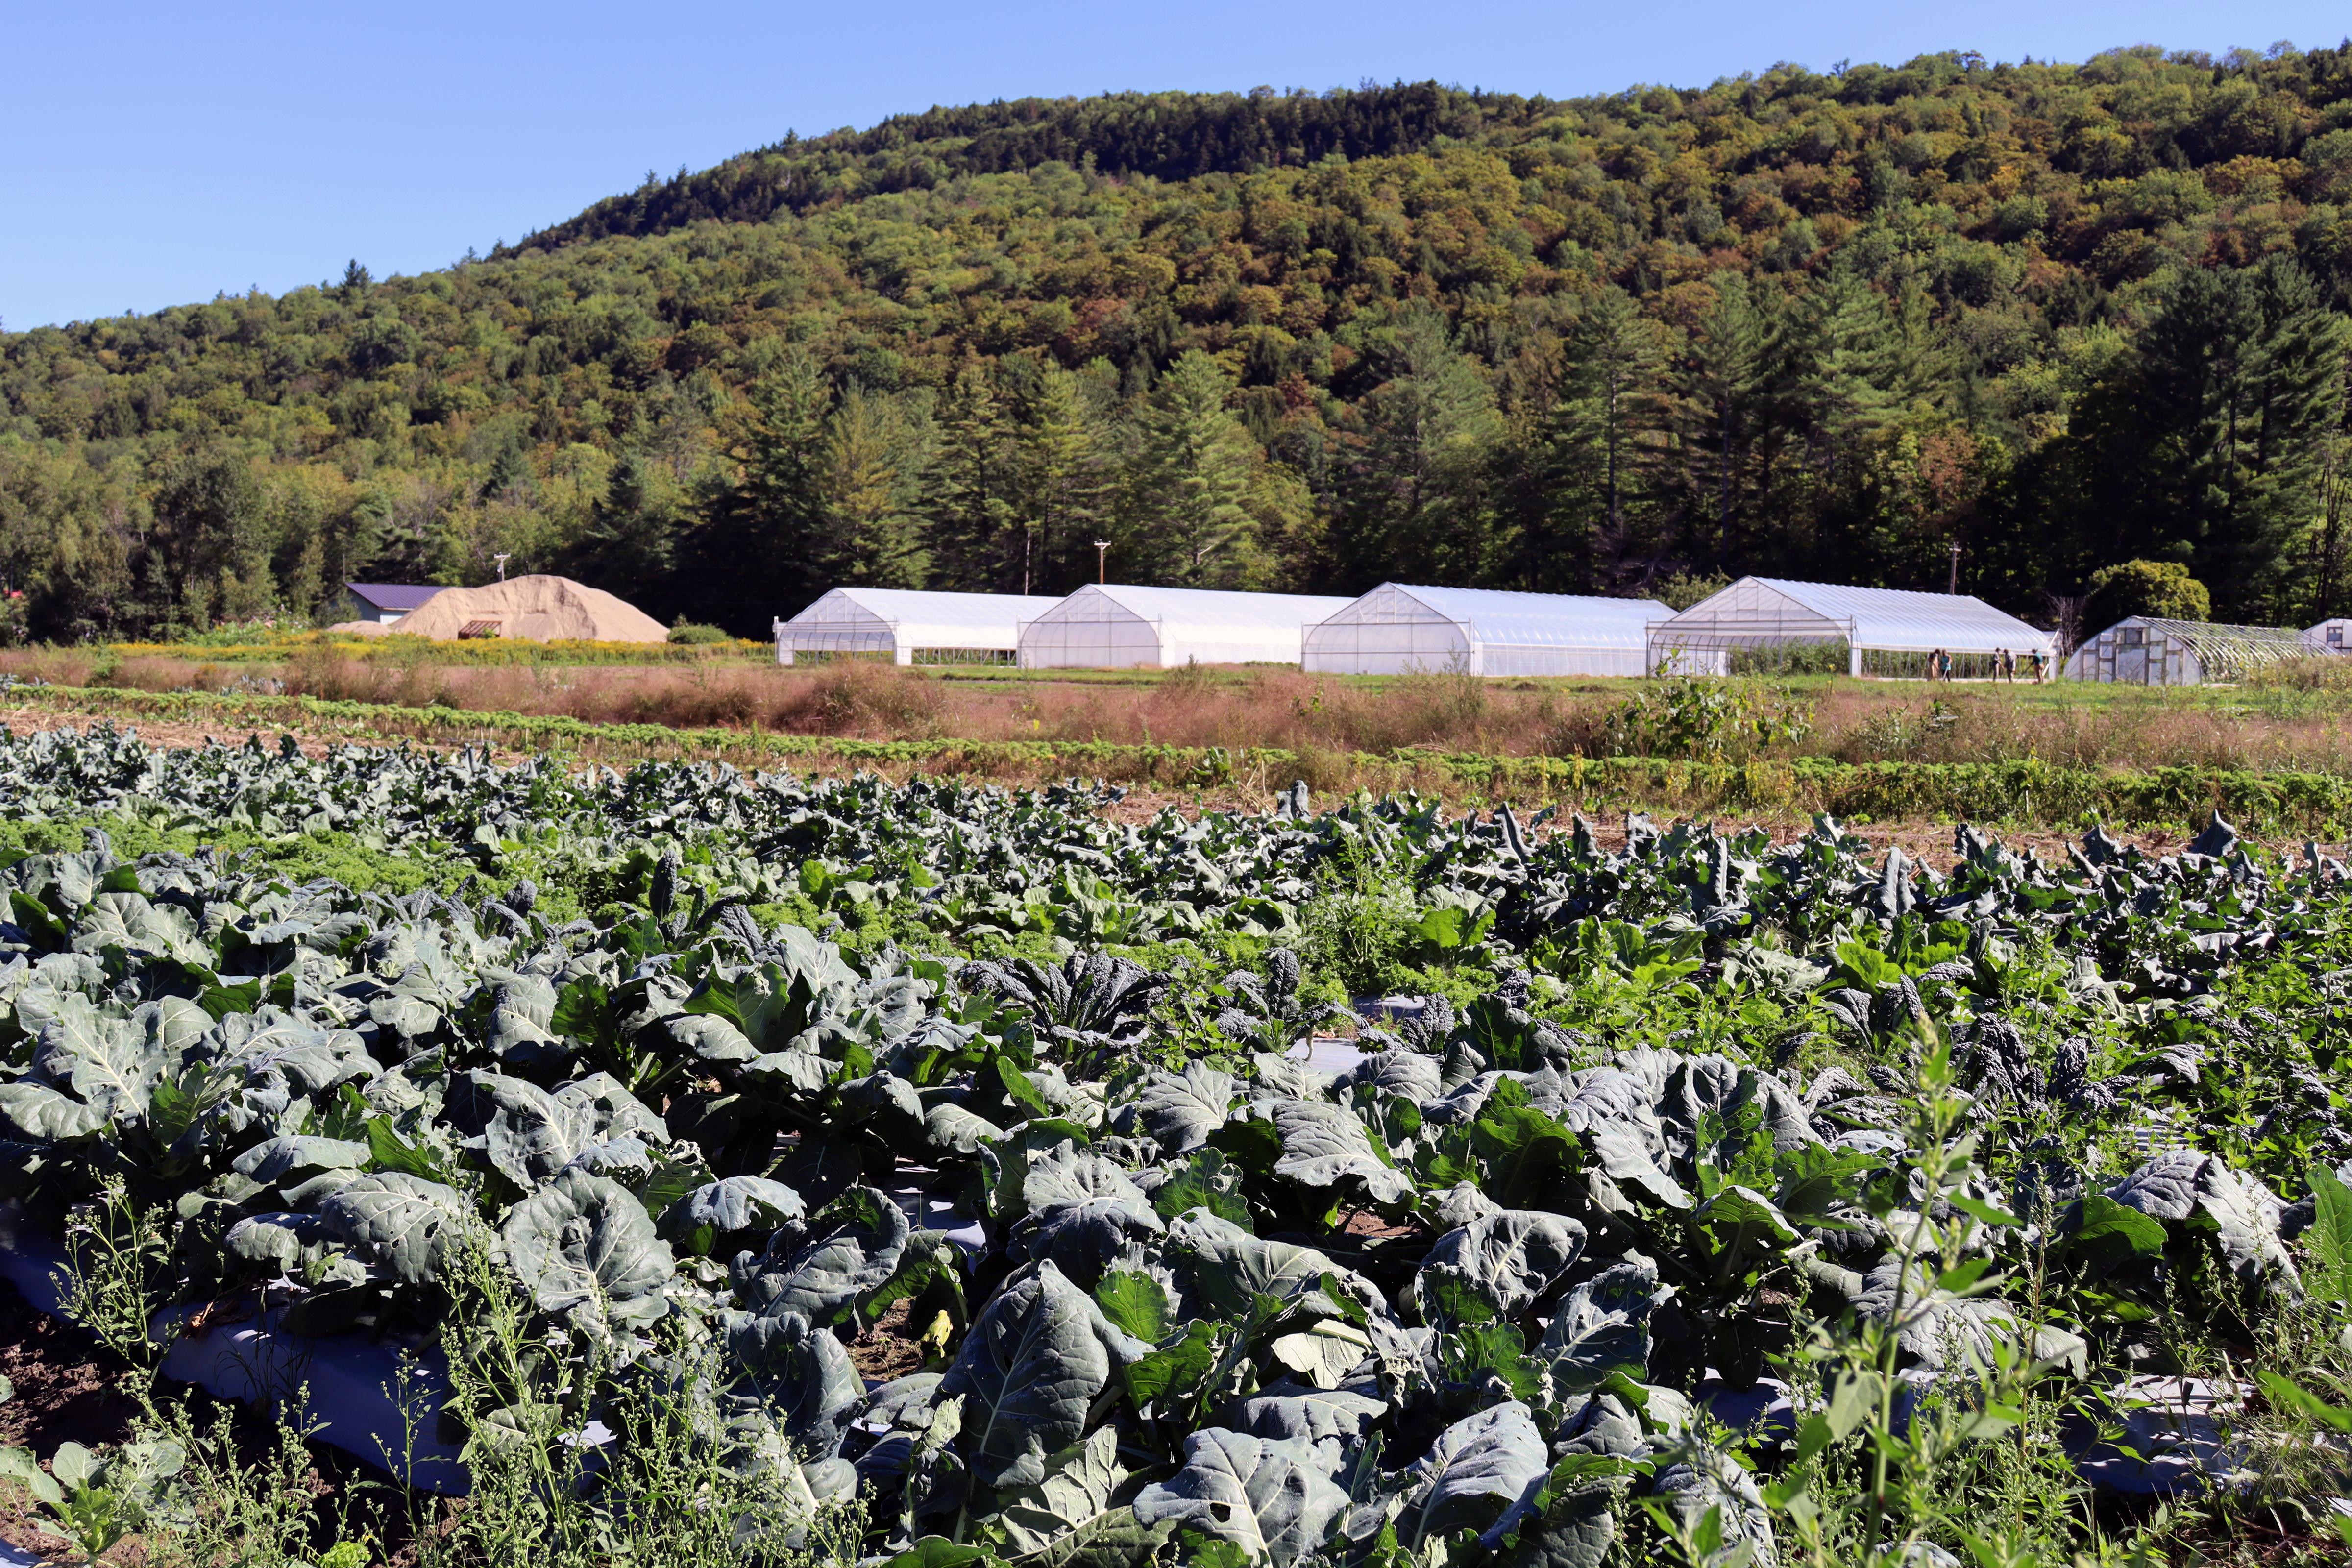 Organic farm fields and high tunnels at Old Road Farm in Granville, VT